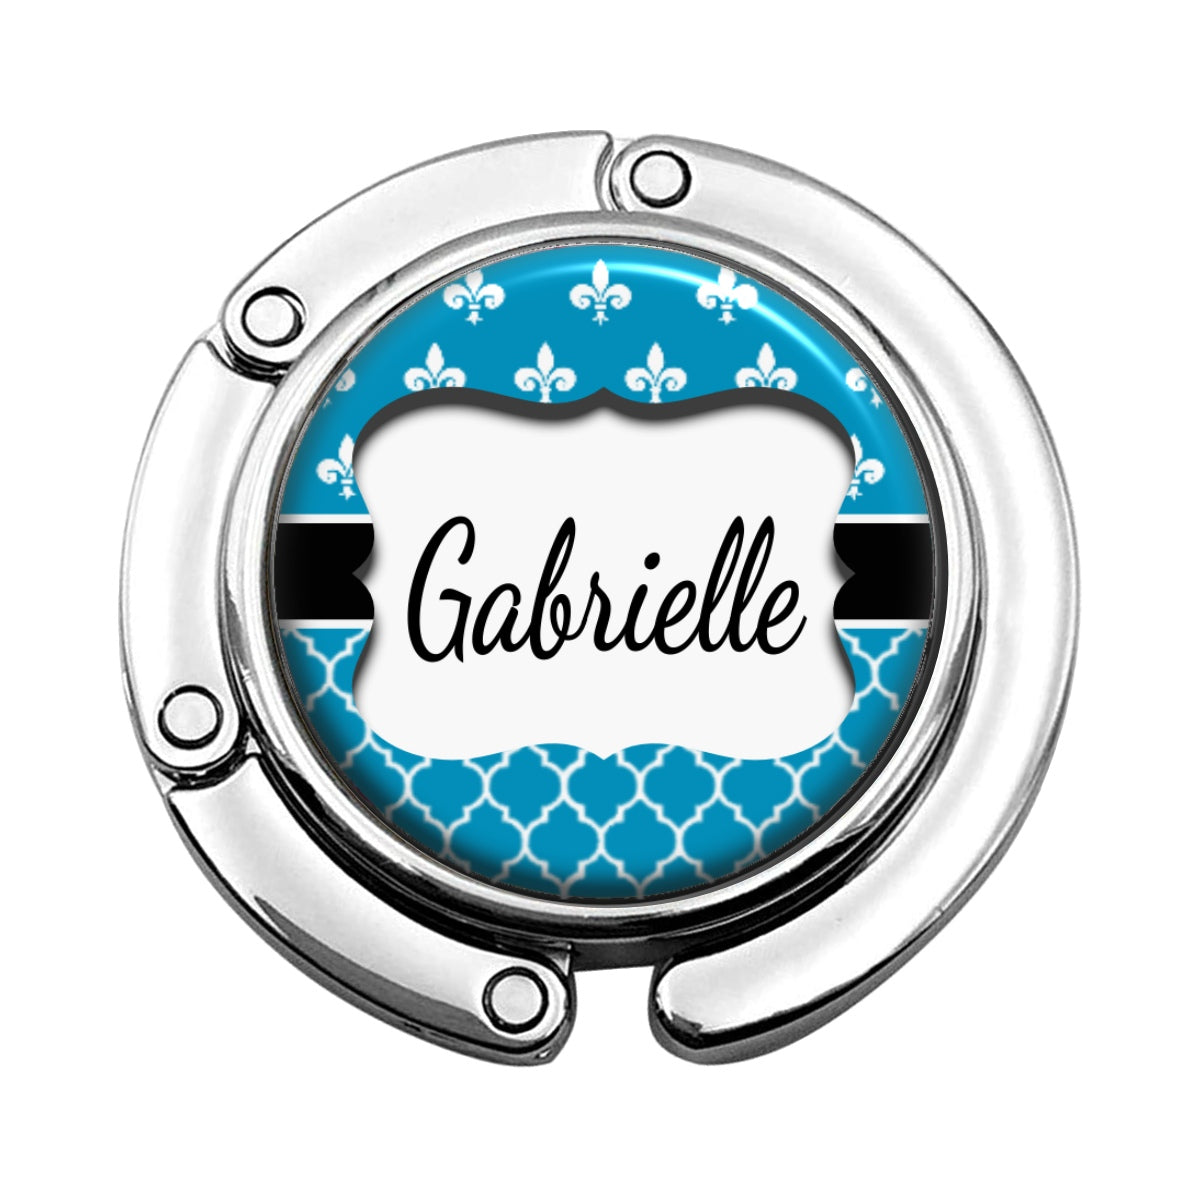 a blue and white badge with a name on it